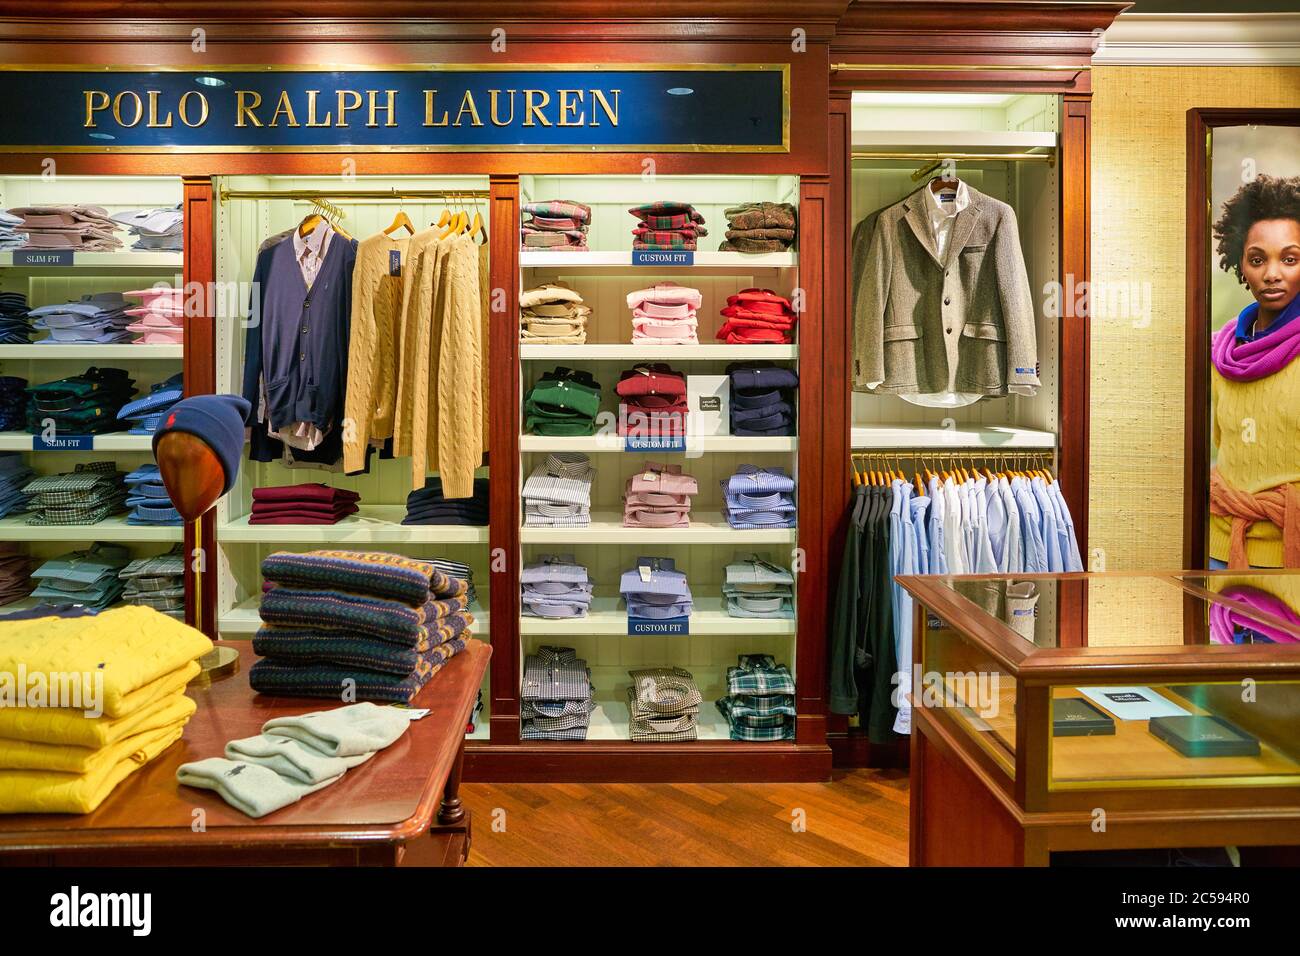 BERLIN, - SEPTEMBER, 2019: Polo Ralph Lauren clothes on display at Galeries Lafayette in Berlin Stock Photo Alamy